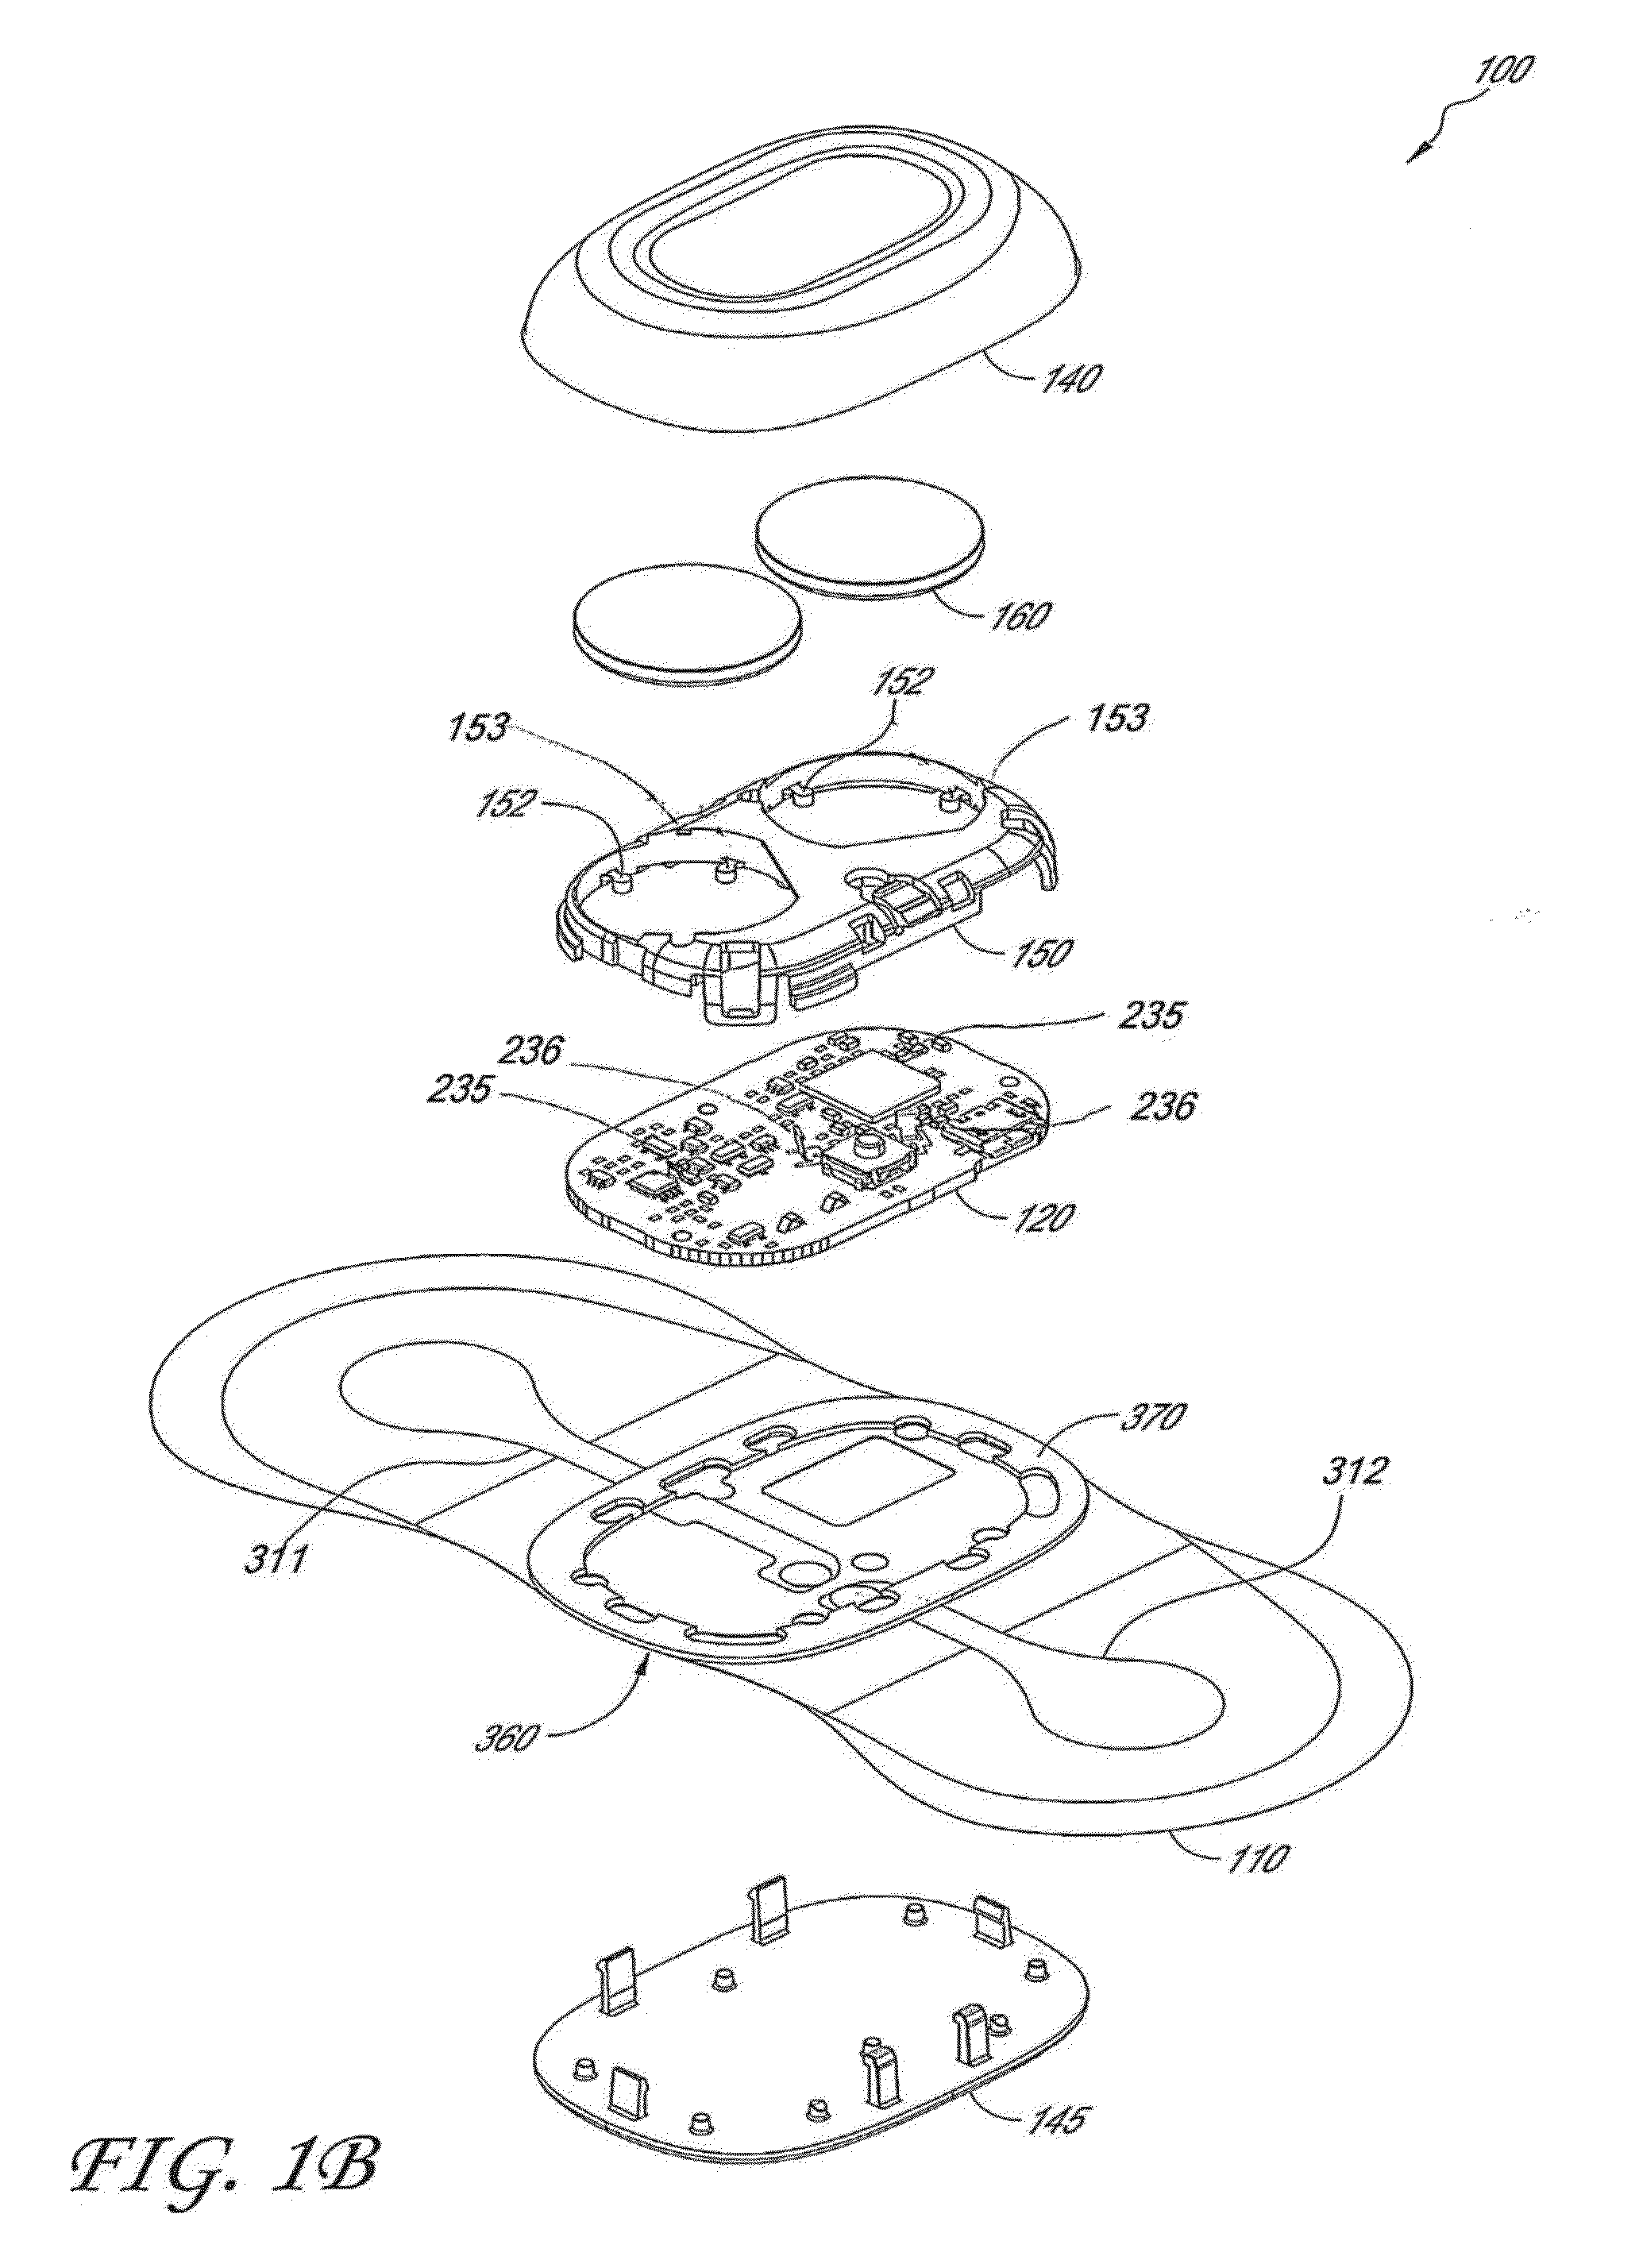 Physiological monitoring device